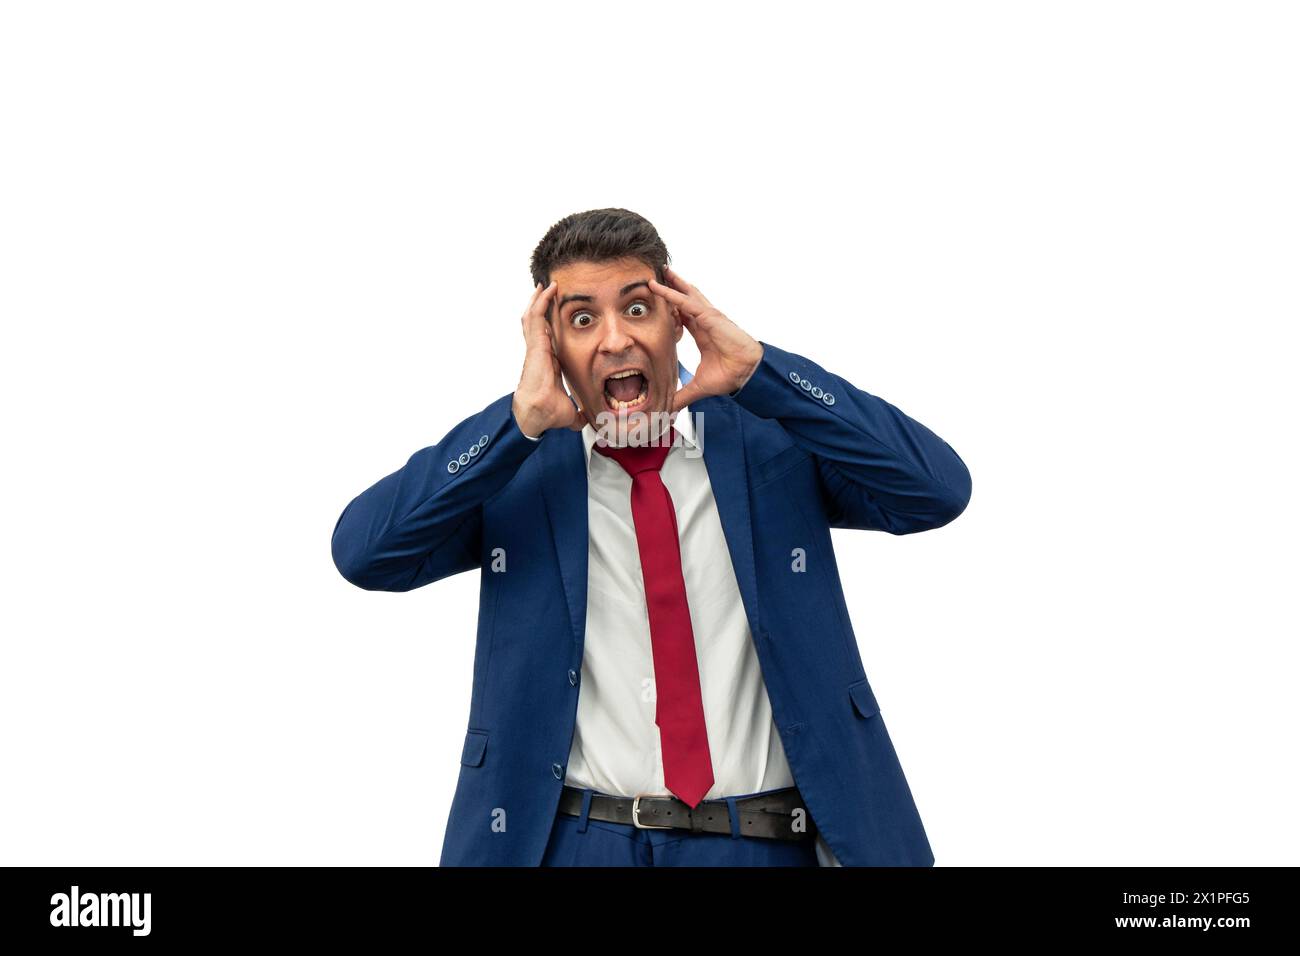 sheer terror on the face of a businessman as he screams with his hands on his head, mouth agape, displaying a look of horror and panic. With an expres Stock Photo